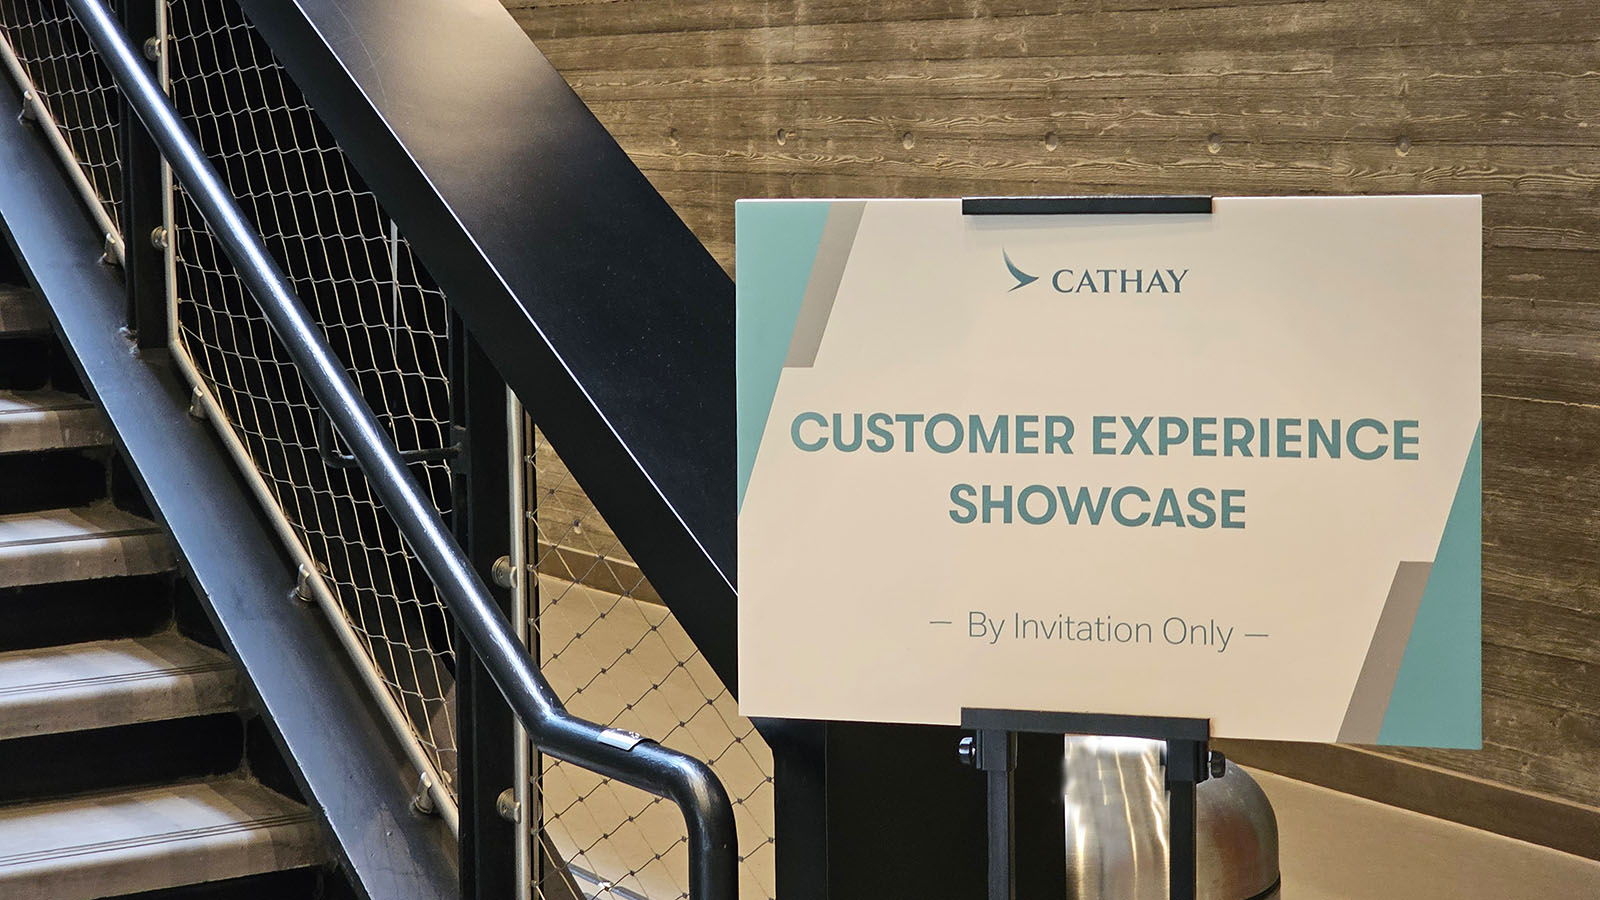 Cathay Pacific's Customer Experience Showcase